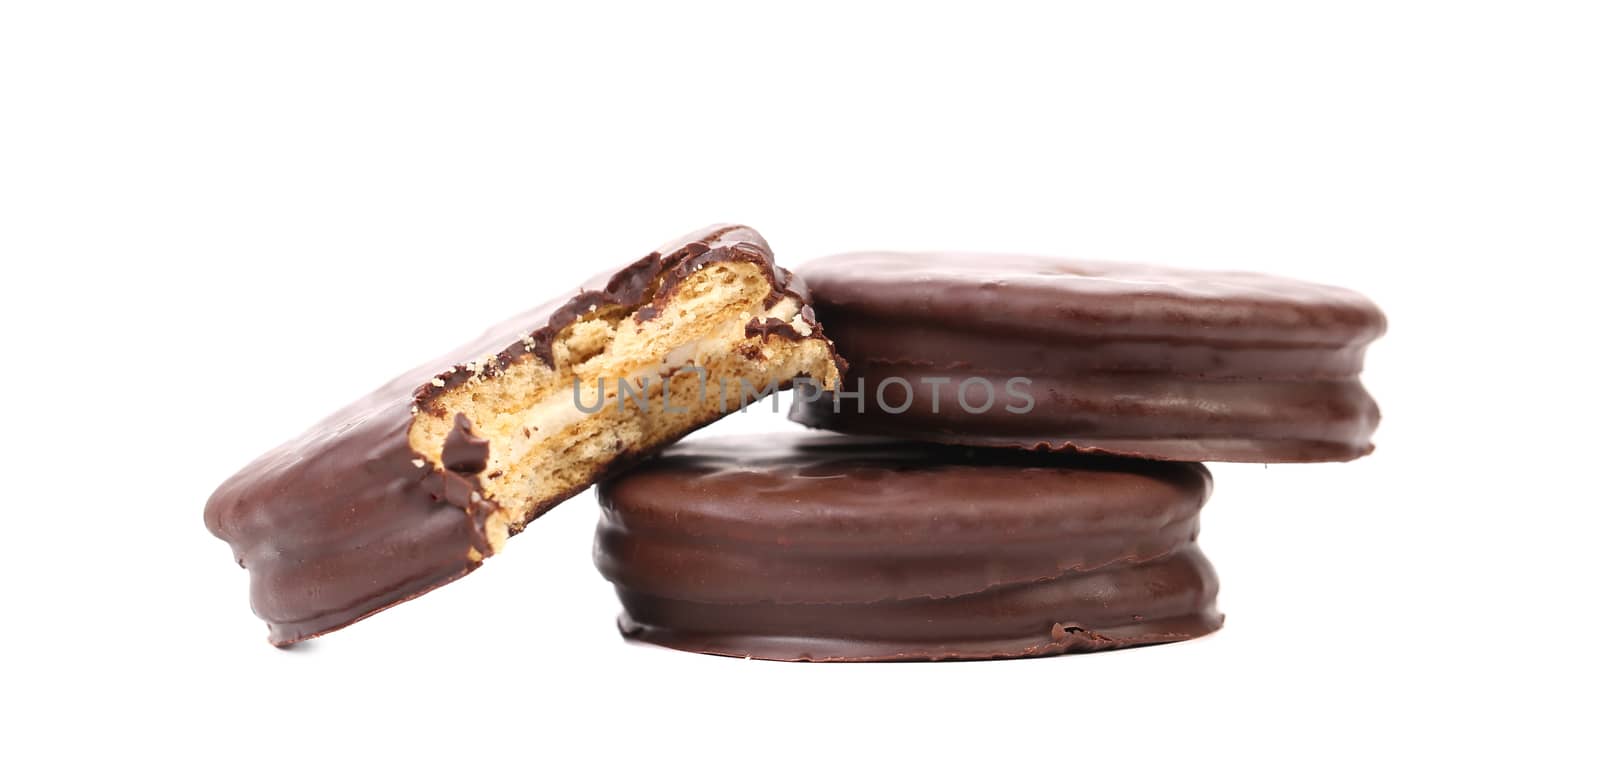 Bitten biscuit sandwich with chocolate. Isolated on a white background.